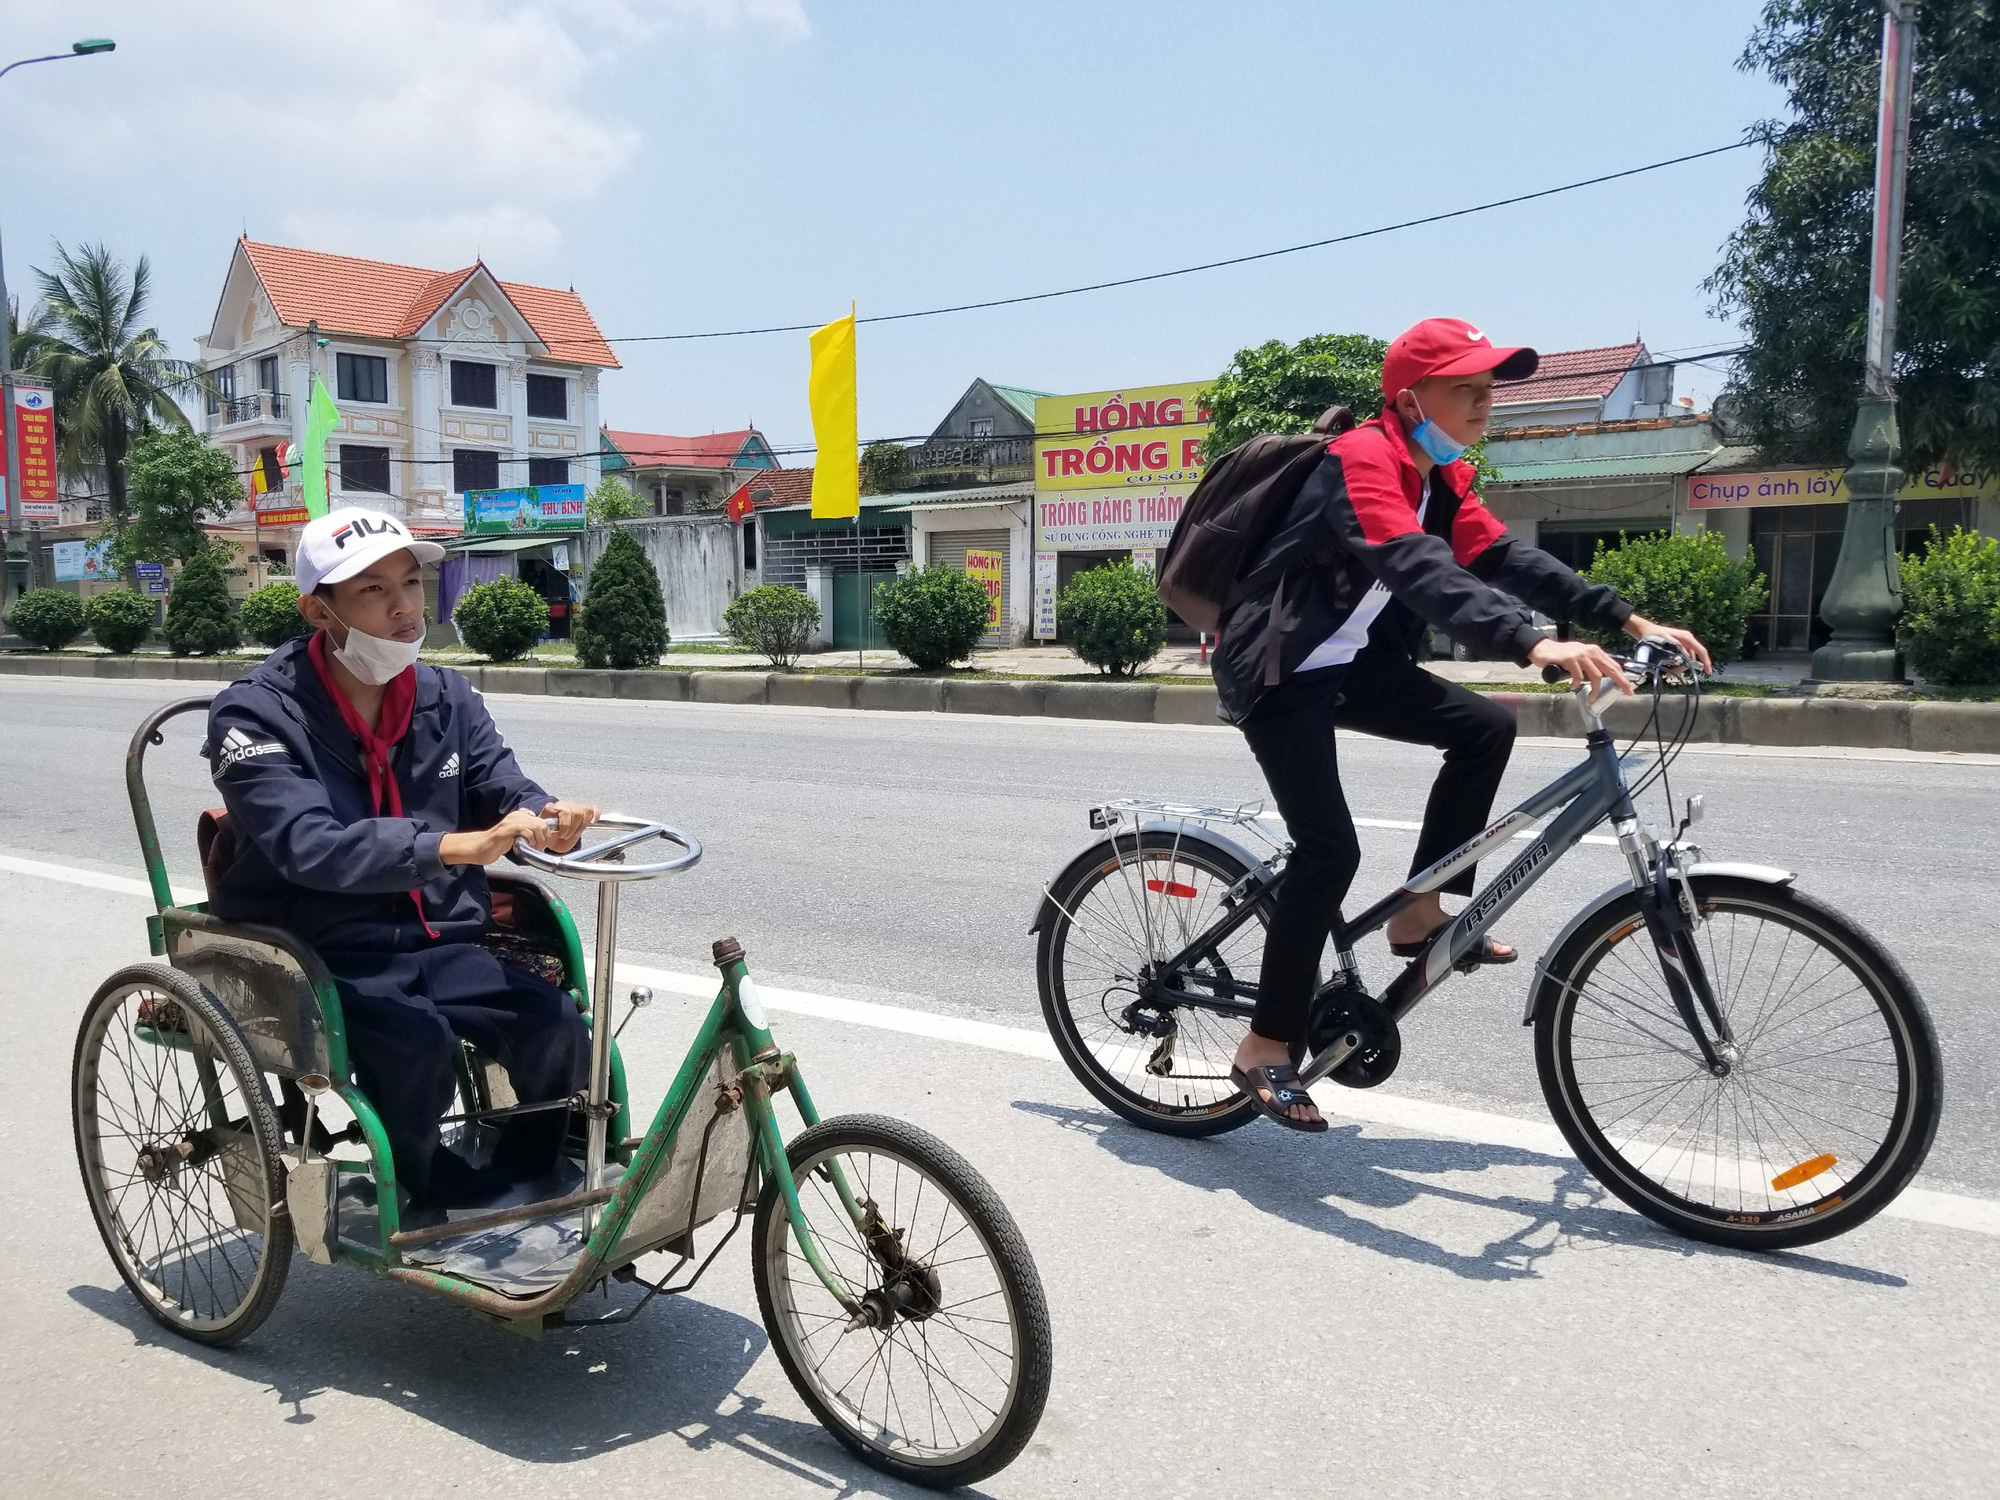 Two Vietnamese boys, five wheels, and a heartwarming story to tell